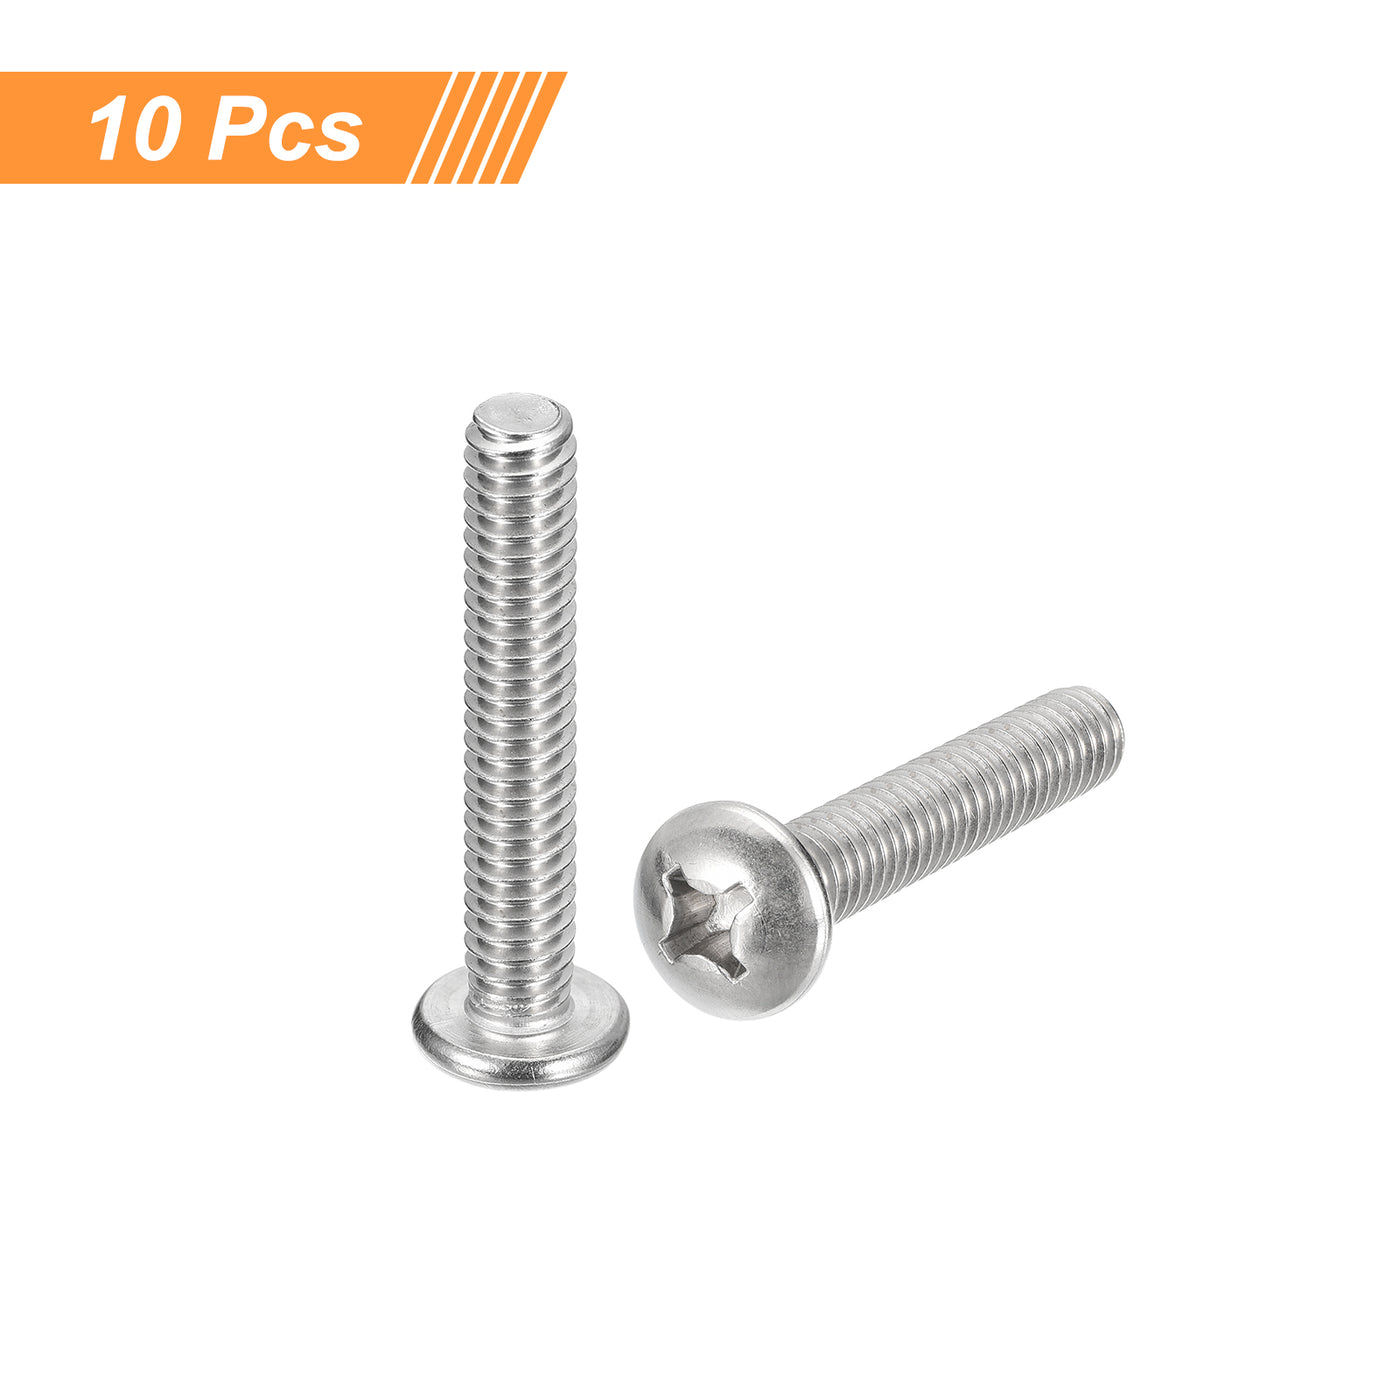 uxcell Uxcell 1/4-20x1-1/2" Pan Head Machine Screws, Stainless Steel 18-8 Screw, Pack of 10